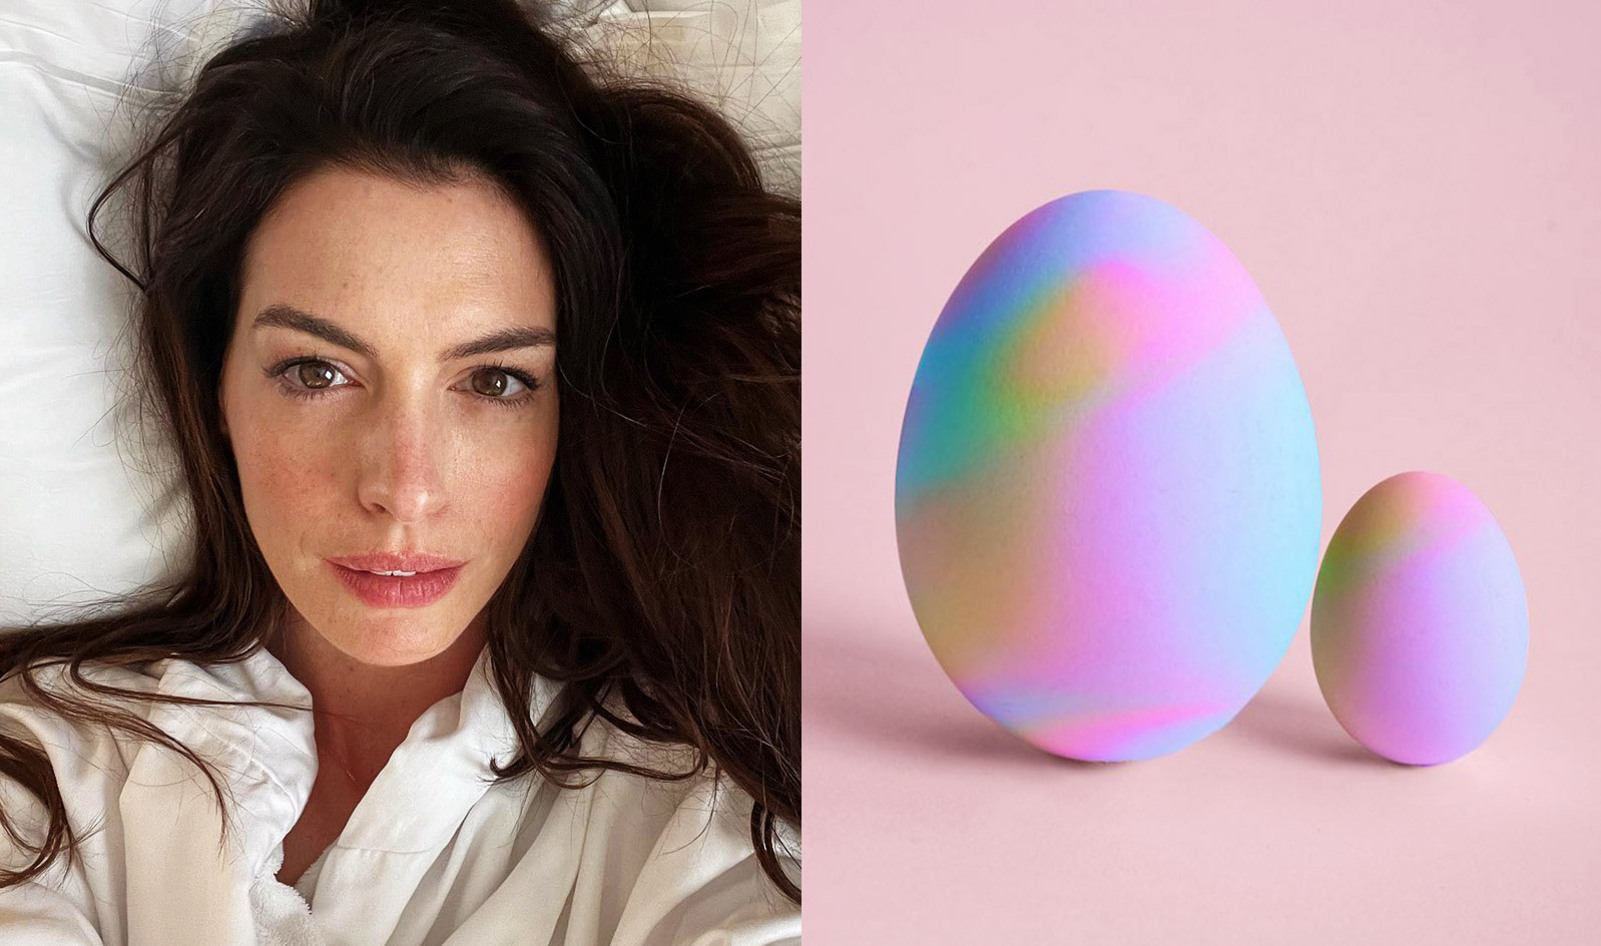 Anne Hathaway Invests in Vegan Egg Tech: Need to Transform Food System Is Clear